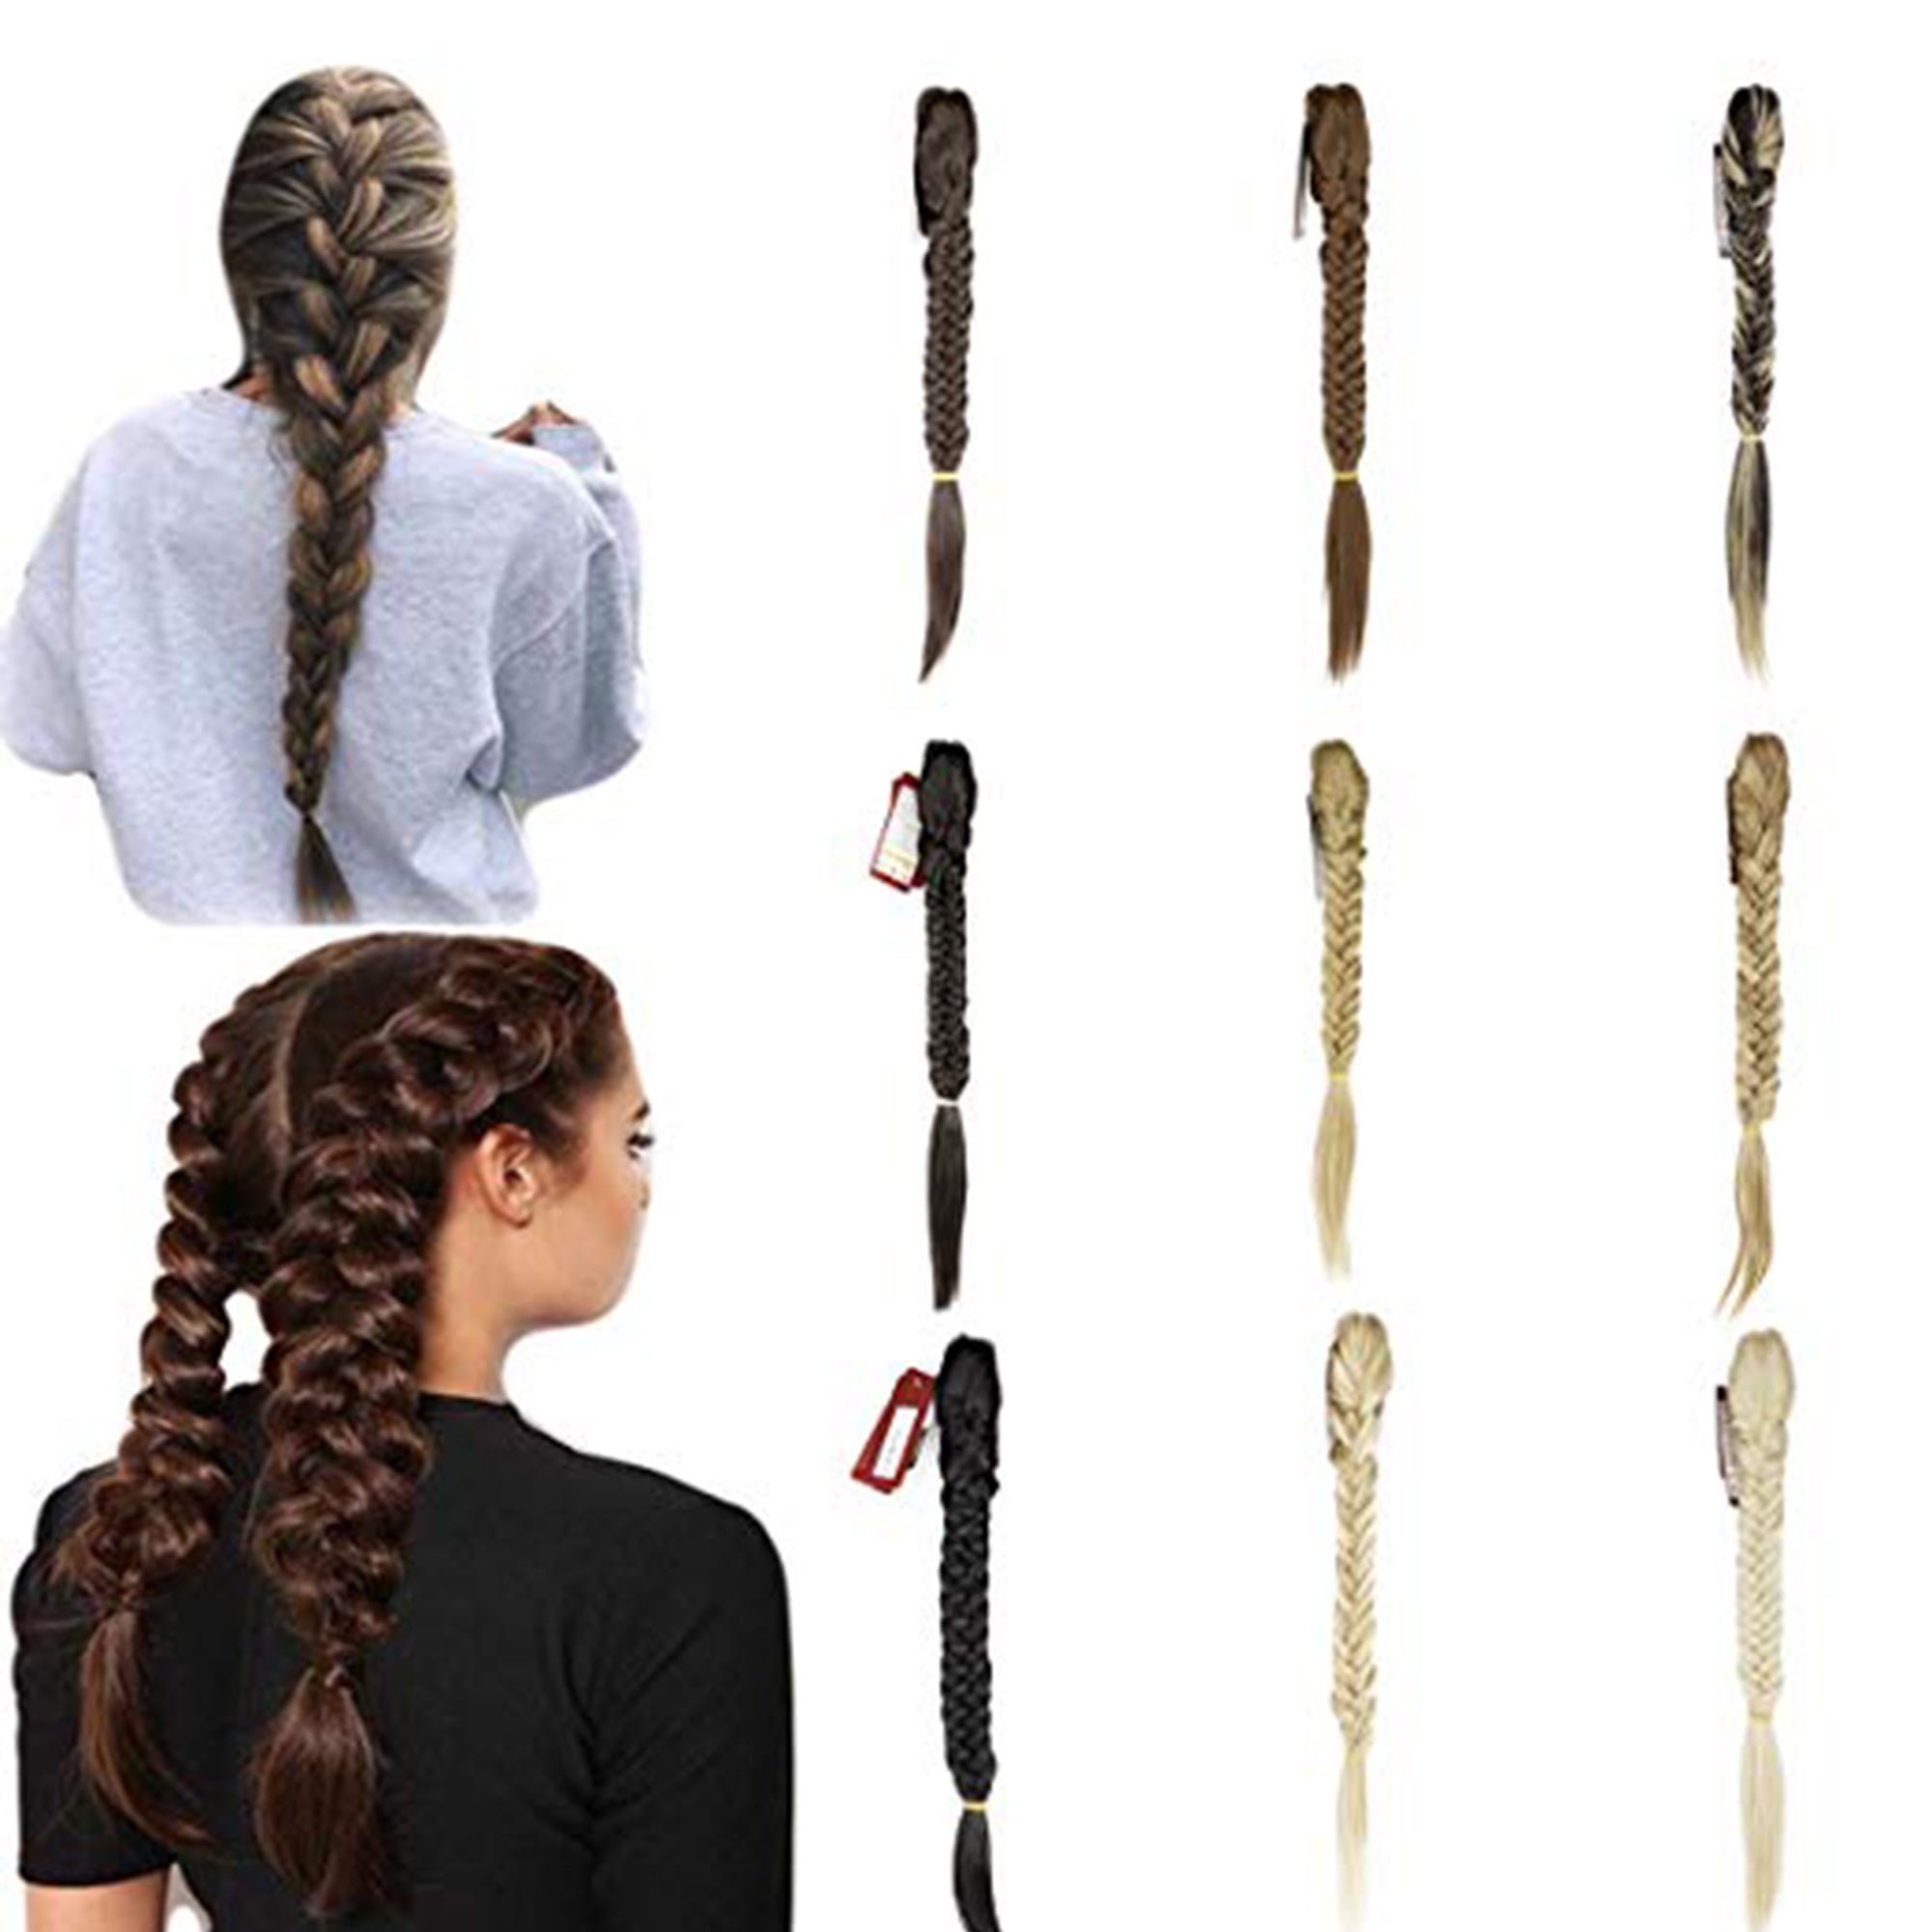 Ponytail Extension Long Straight Diy Braided With Hair Loop